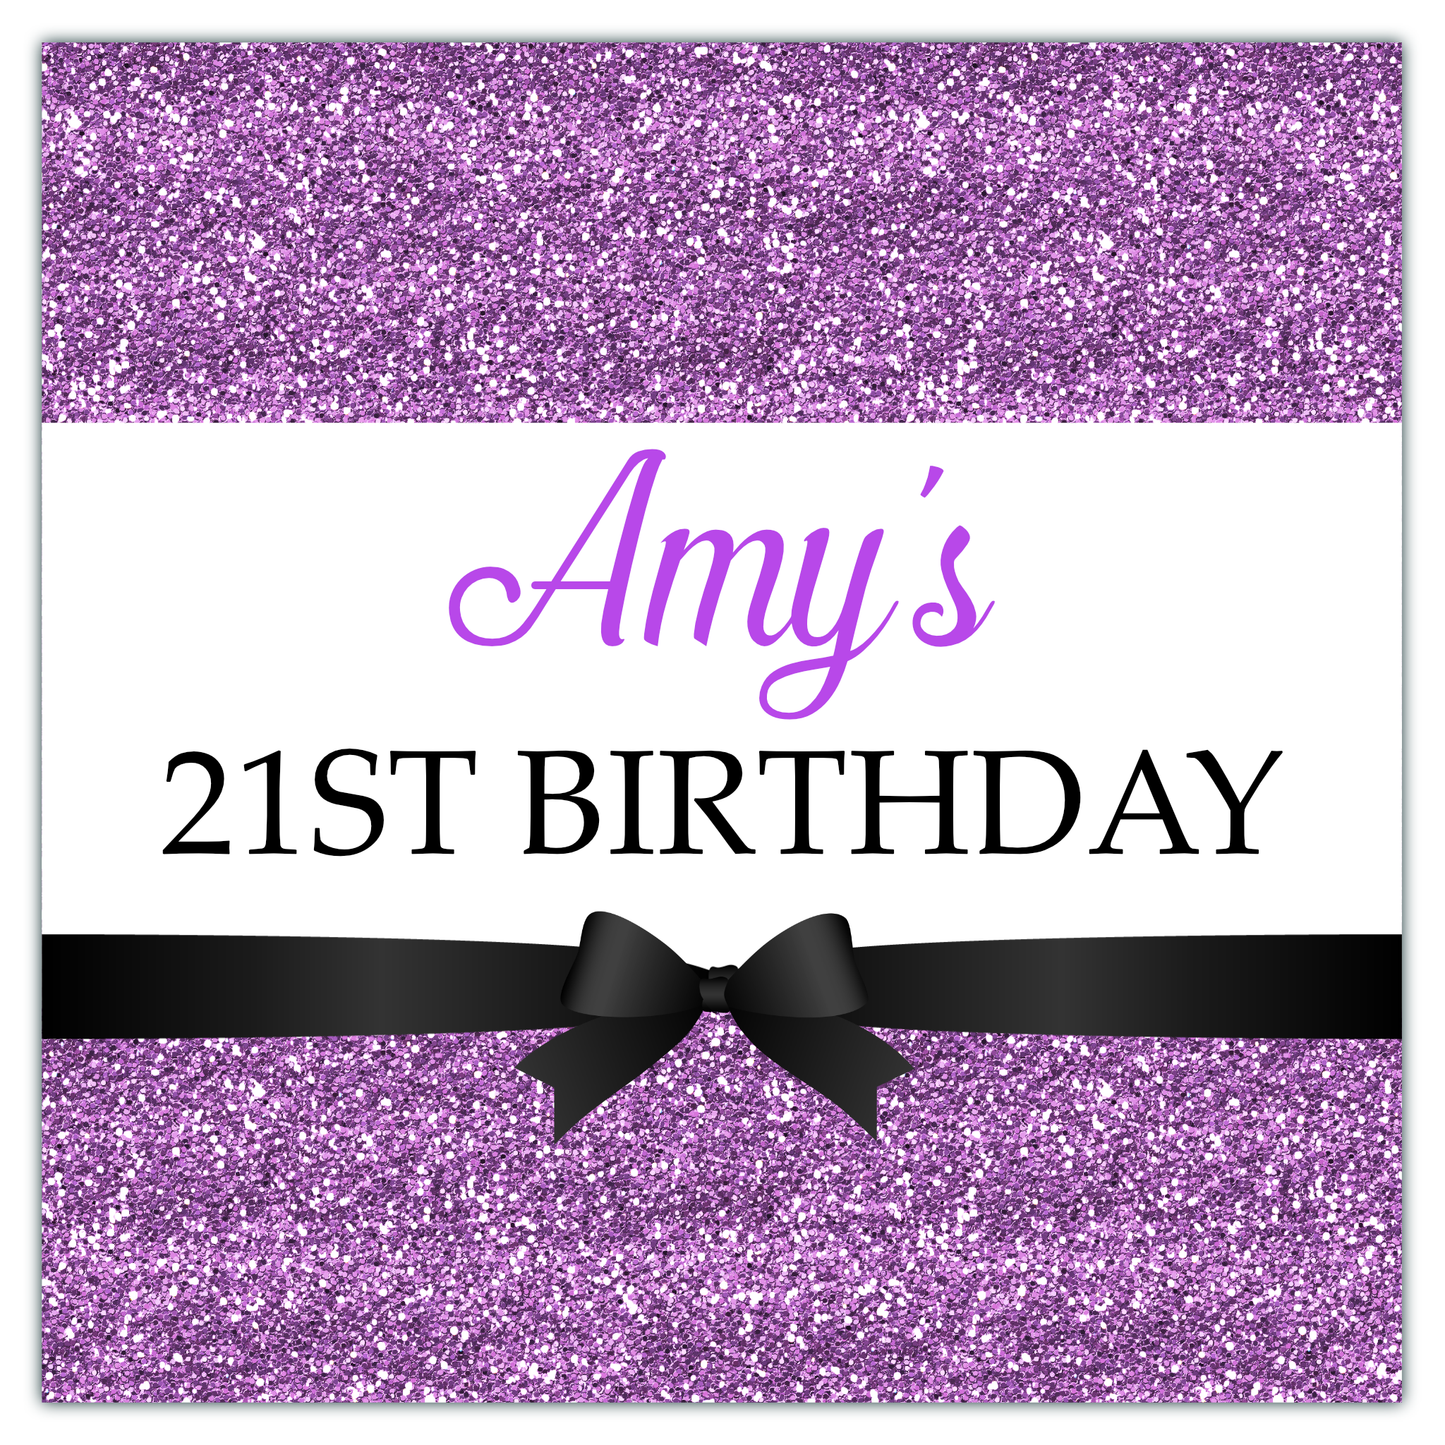 Personalised Birthday Party Stickers for Favours Party Bags